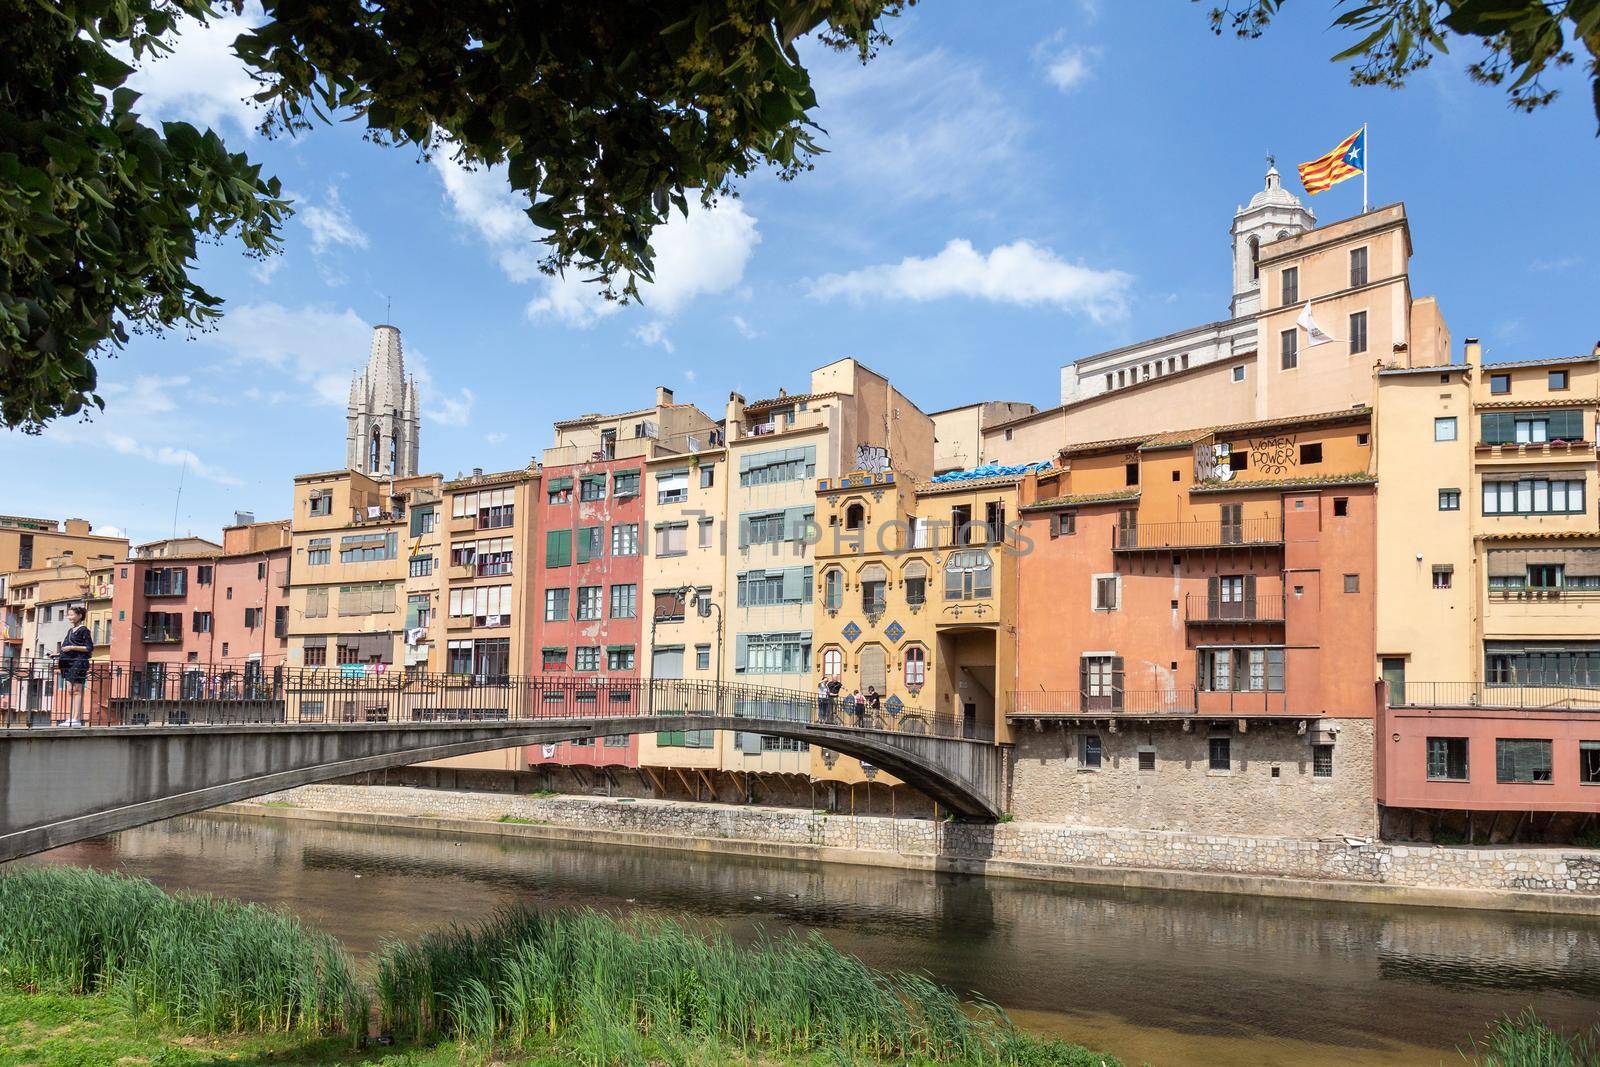 Colorful houses in Girona, Catalonia, Spain by Digoarpi